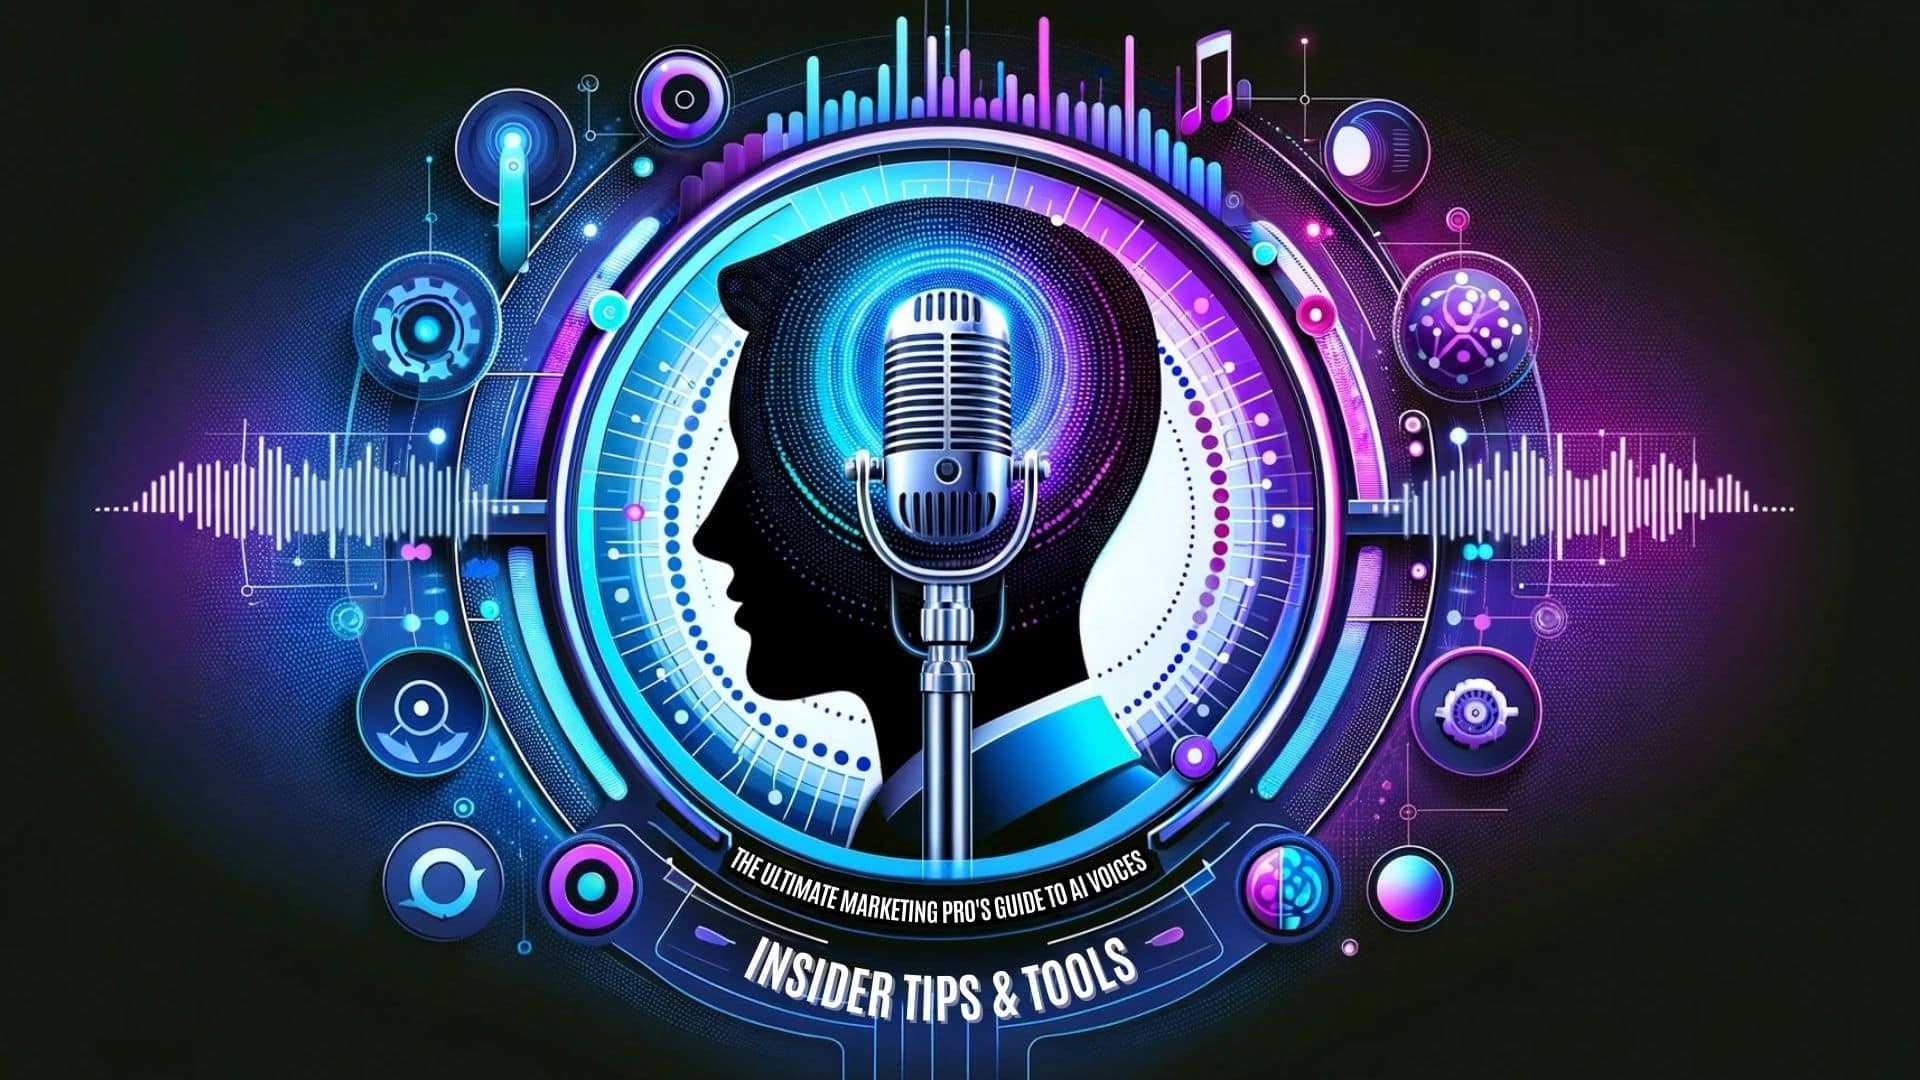 The image is a vibrant and colorful digital illustration that features a central theme of audio and marketing technology. At the heart of the composition is a large, vintage-style microphone, surrounded by a complex array of futuristic and abstract elements. These elements include glowing neon lines, circular patterns that resemble audio volume levels or equalizers, and various icons and symbols that suggest digital connectivity and networking. The microphone is set against a backdrop that subtly incorporates a human profile, hinting at communication and the human element in technology. The colors predominantly range from deep blues and purples to vibrant pinks and teals, creating a dynamic and energetic visual effect. The text "The Ultimate Marketing Pro's Guide to AI Voices: Insider Tips & Tools" is prominently displayed, suggesting the image's purpose is to represent a resource for marketing professionals. This artwork blends themes of technology, communication, and marketing strategy into a visually compelling design.